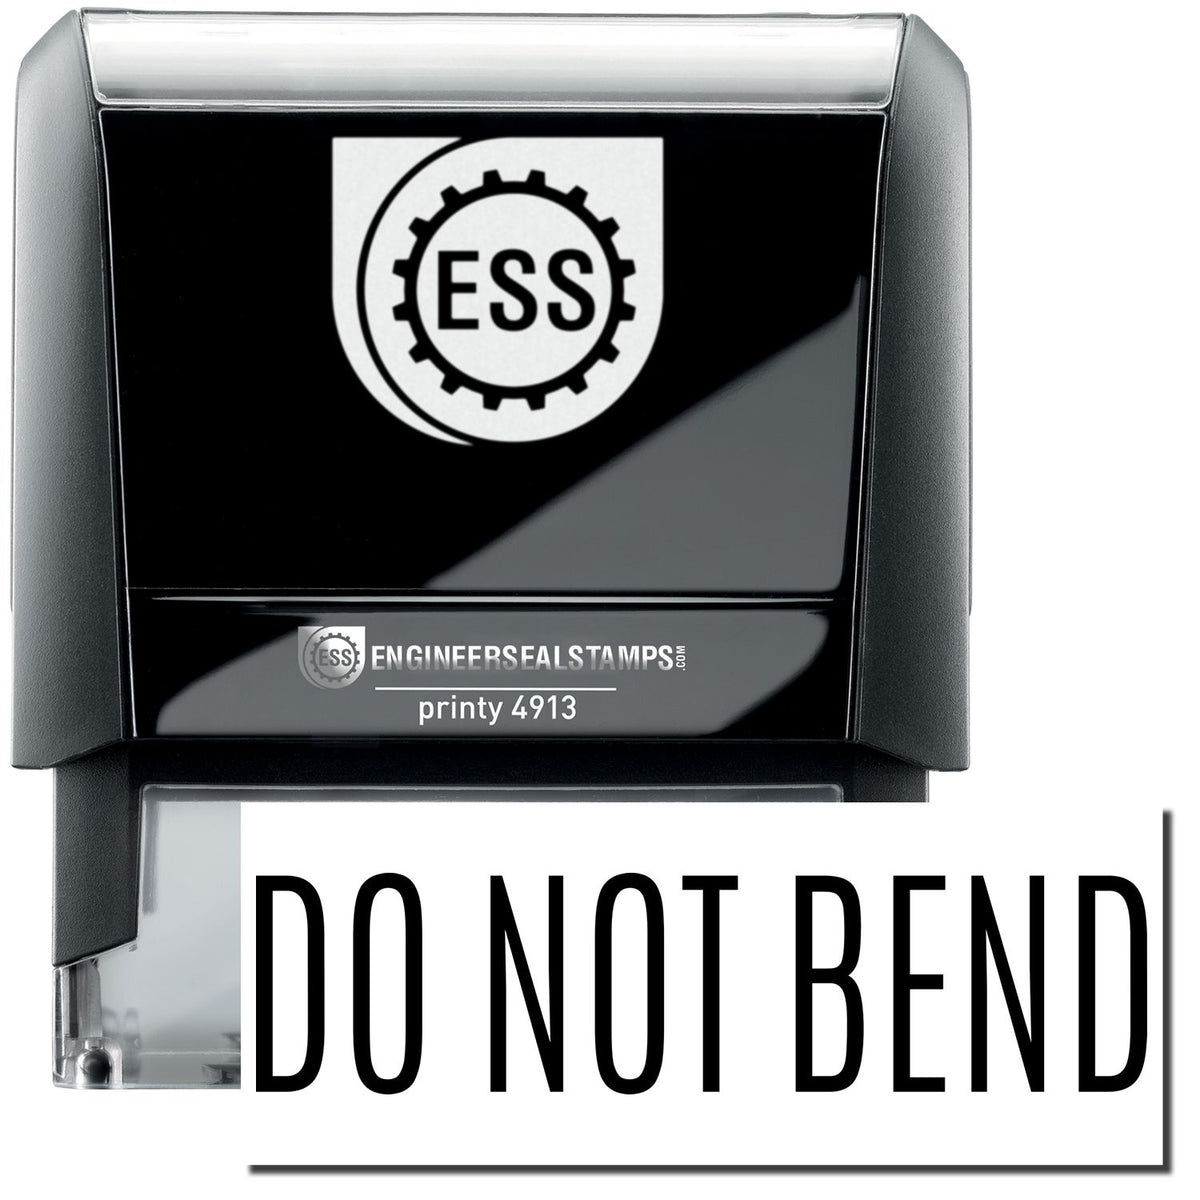 A self-inking stamp with a stamped image showing how the text &quot;DO NOT BEND&quot; in a large font is displayed by it after stamping.